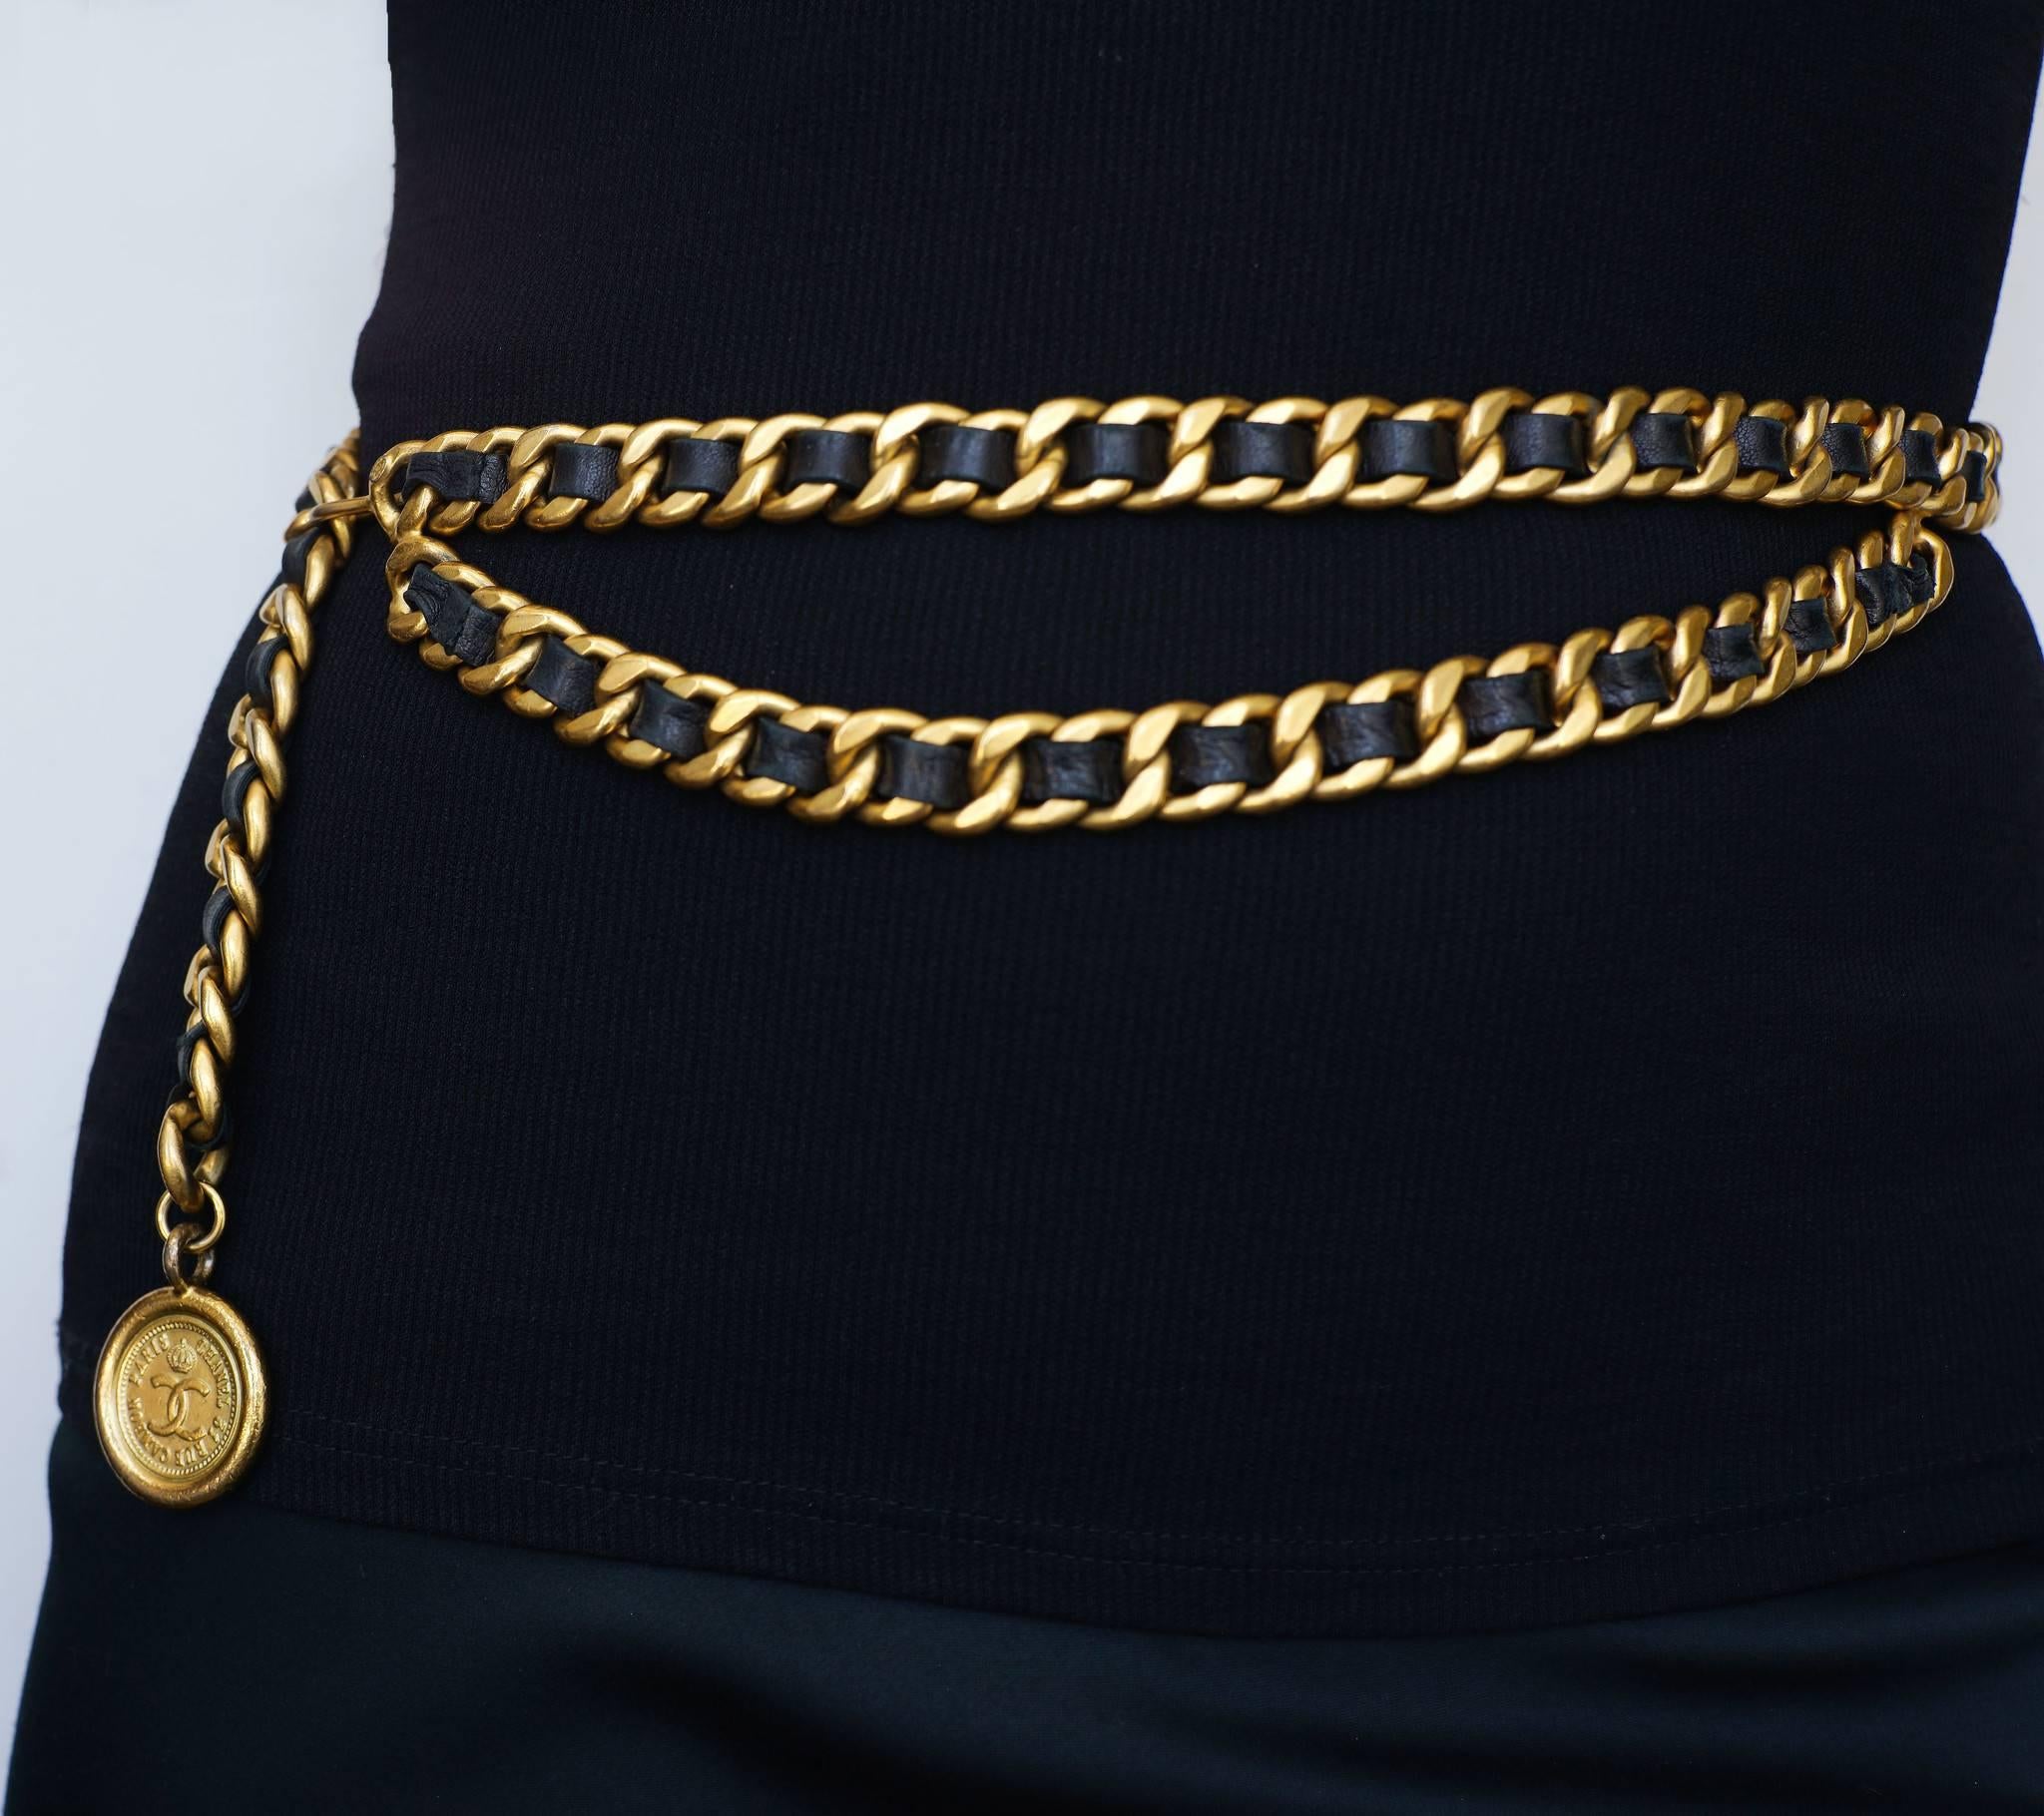 Chanel classic double chain belt with goldtone chain with leather woven through out the links and a Chanel medallion coin on the end.  

-Measurements-
length: 36"
Thickness: 1/2"

Good Vintage Condition:Please remember all clothes are